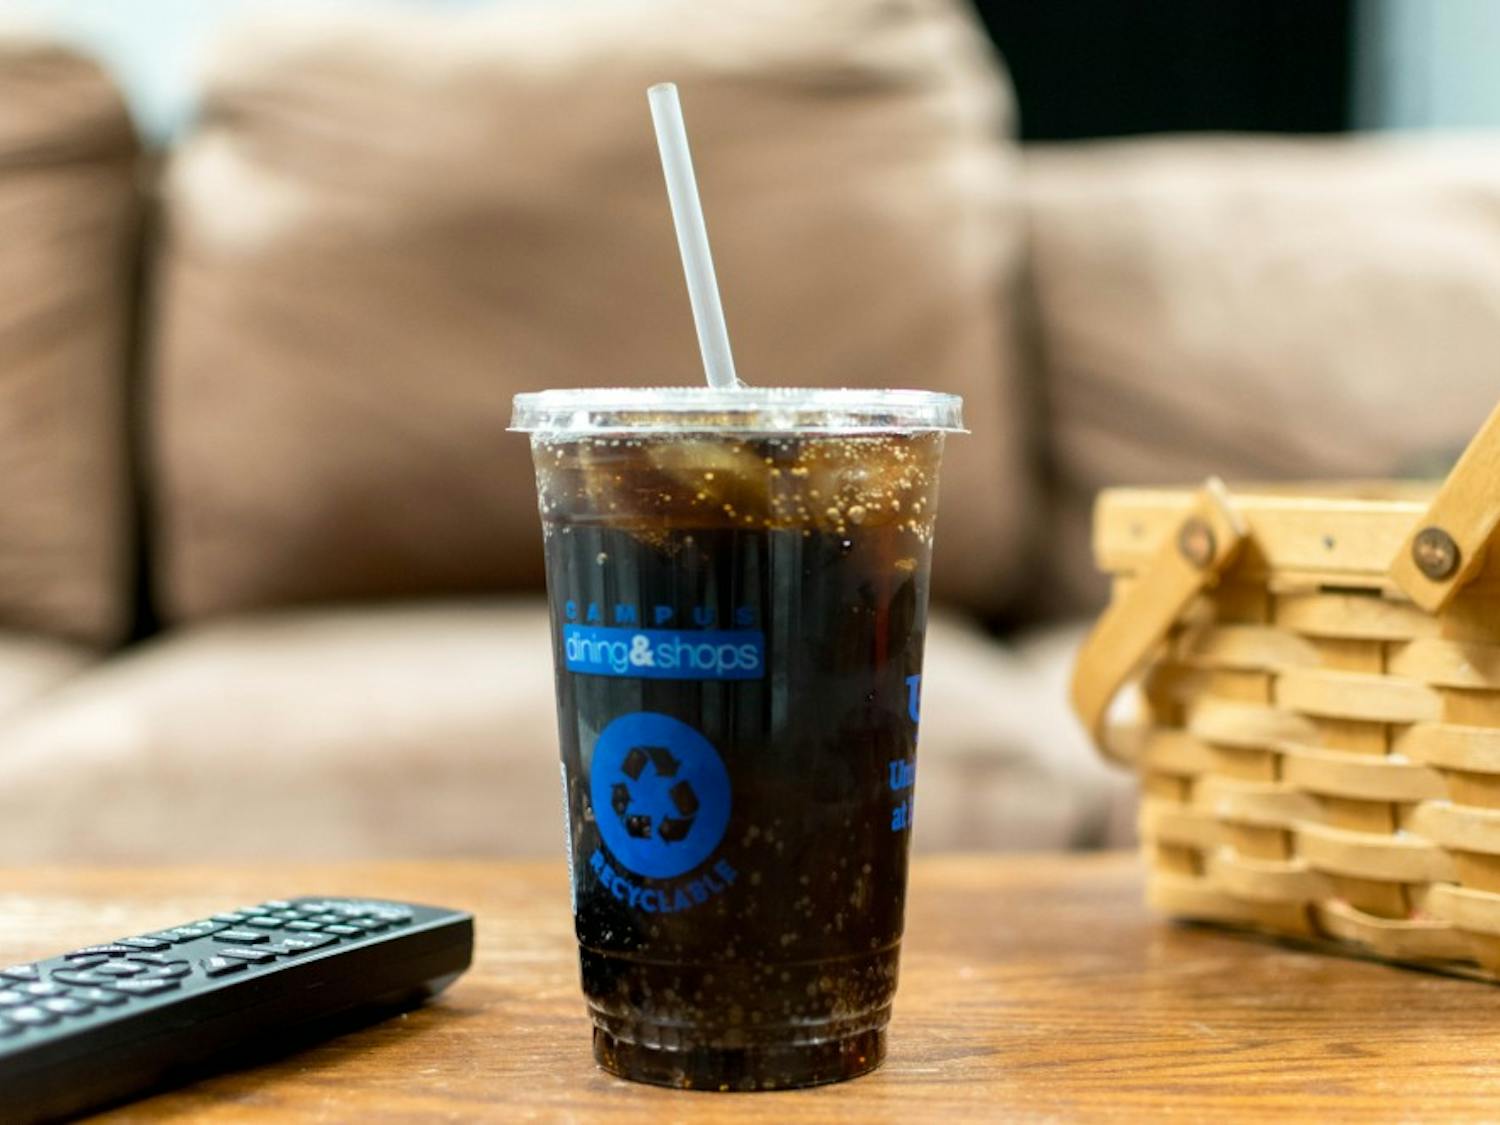 UB Campus Dining and Shops recently introduced new plastic cups, a change from the green paper-based cups used in previous semesters. The new cups are recyclable and were created to alleviate problems with paper cups breaking down.